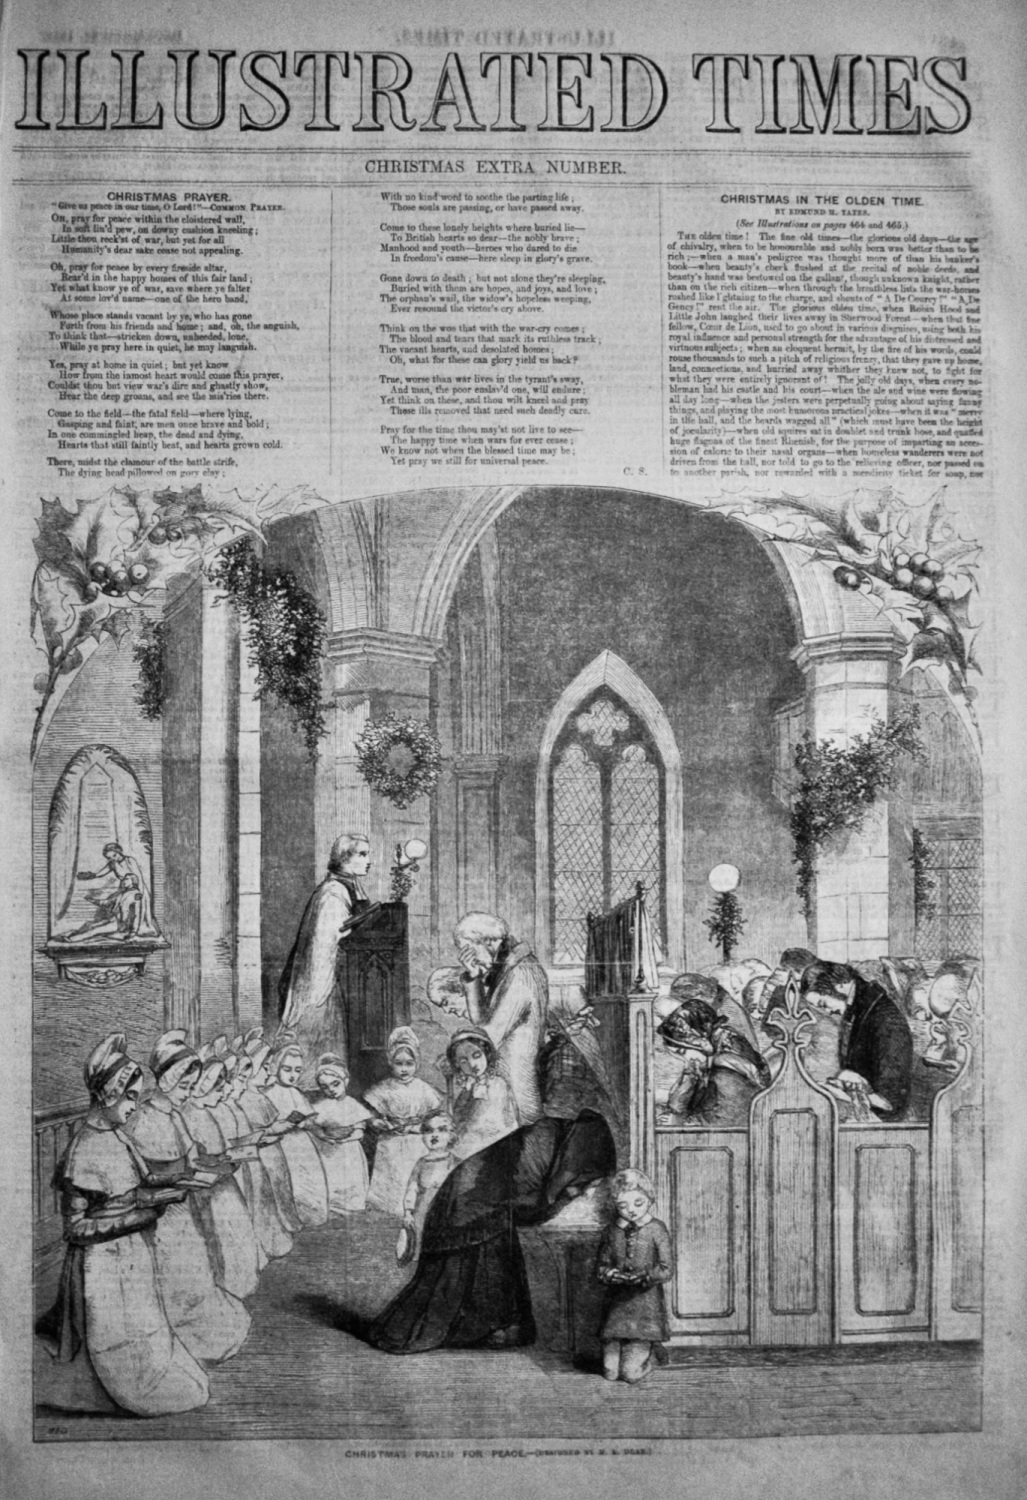 Illustrated Times, Christmas Extra Number. 1855.